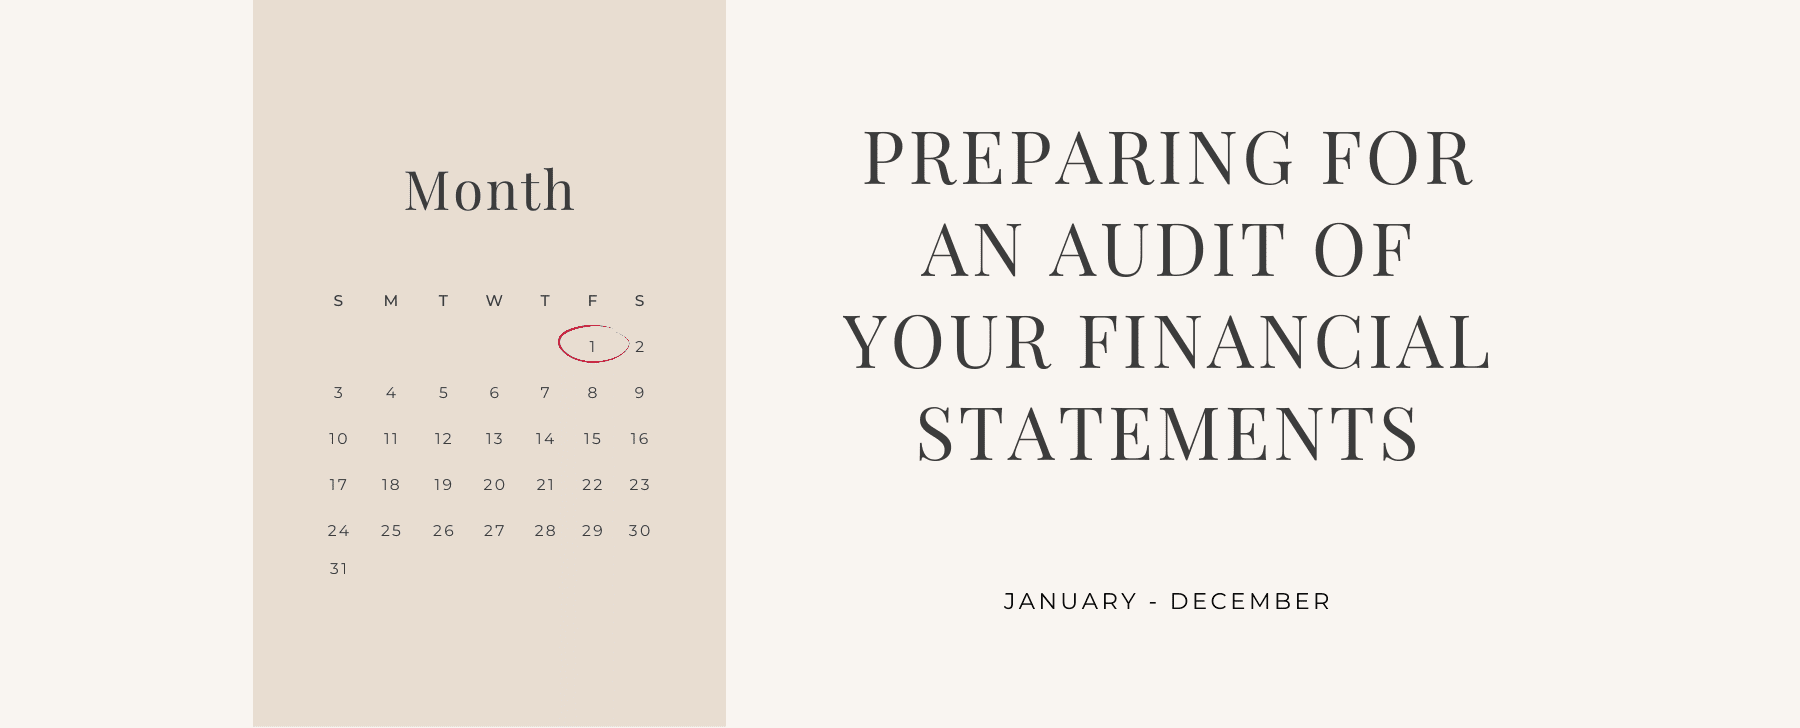 How do i prepare for an audit of my financial statements